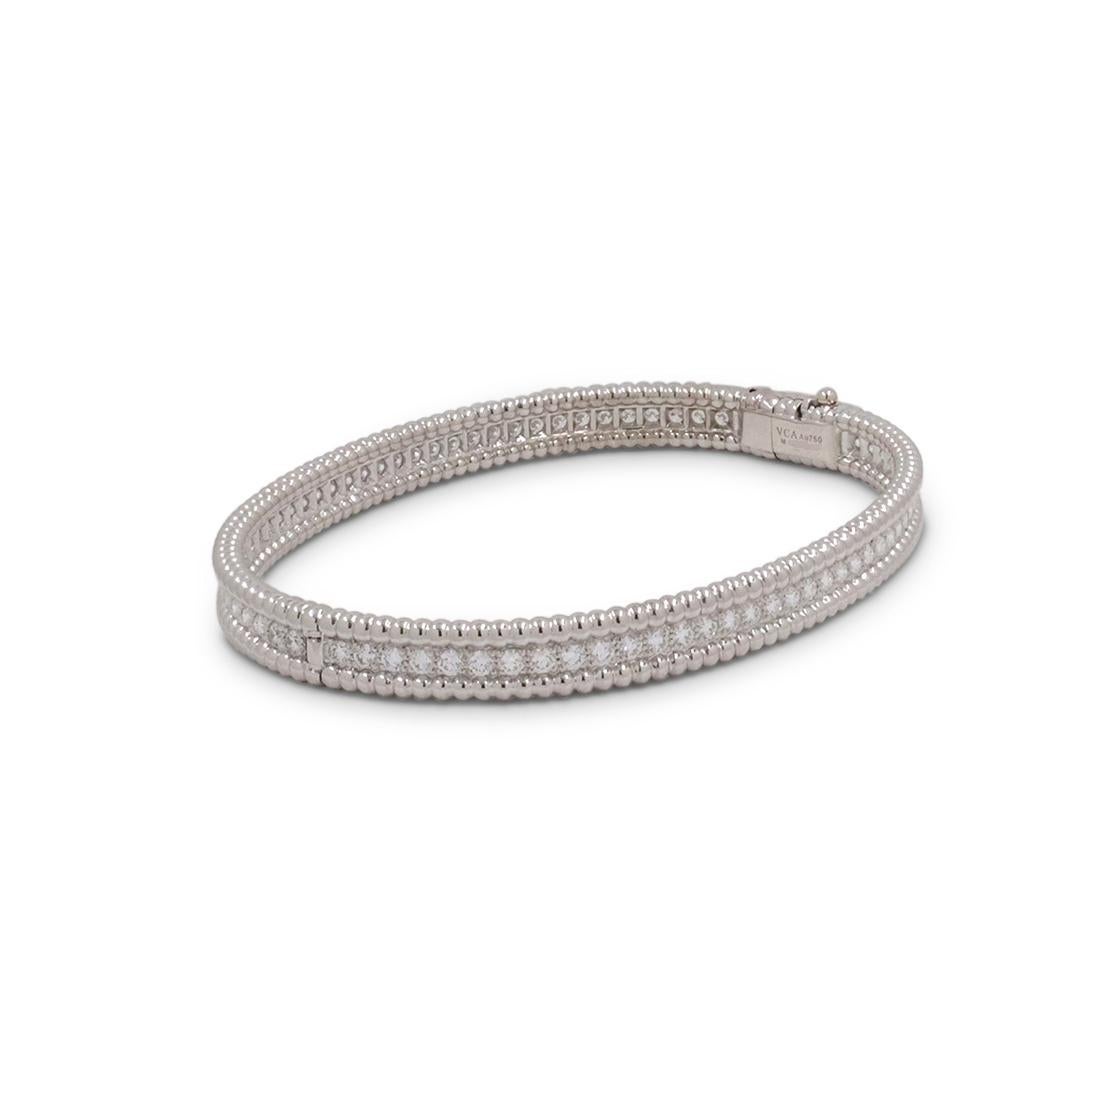 Authentic Van Cleef & Arpels 'Perlée' bracelet crafted in 18 karat white gold features a single row of high-quality round brilliant cut diamonds weighing an estimated 2.16 carats total weight (E-F, VS). Signed VCA, Au750, M, with serial number. The